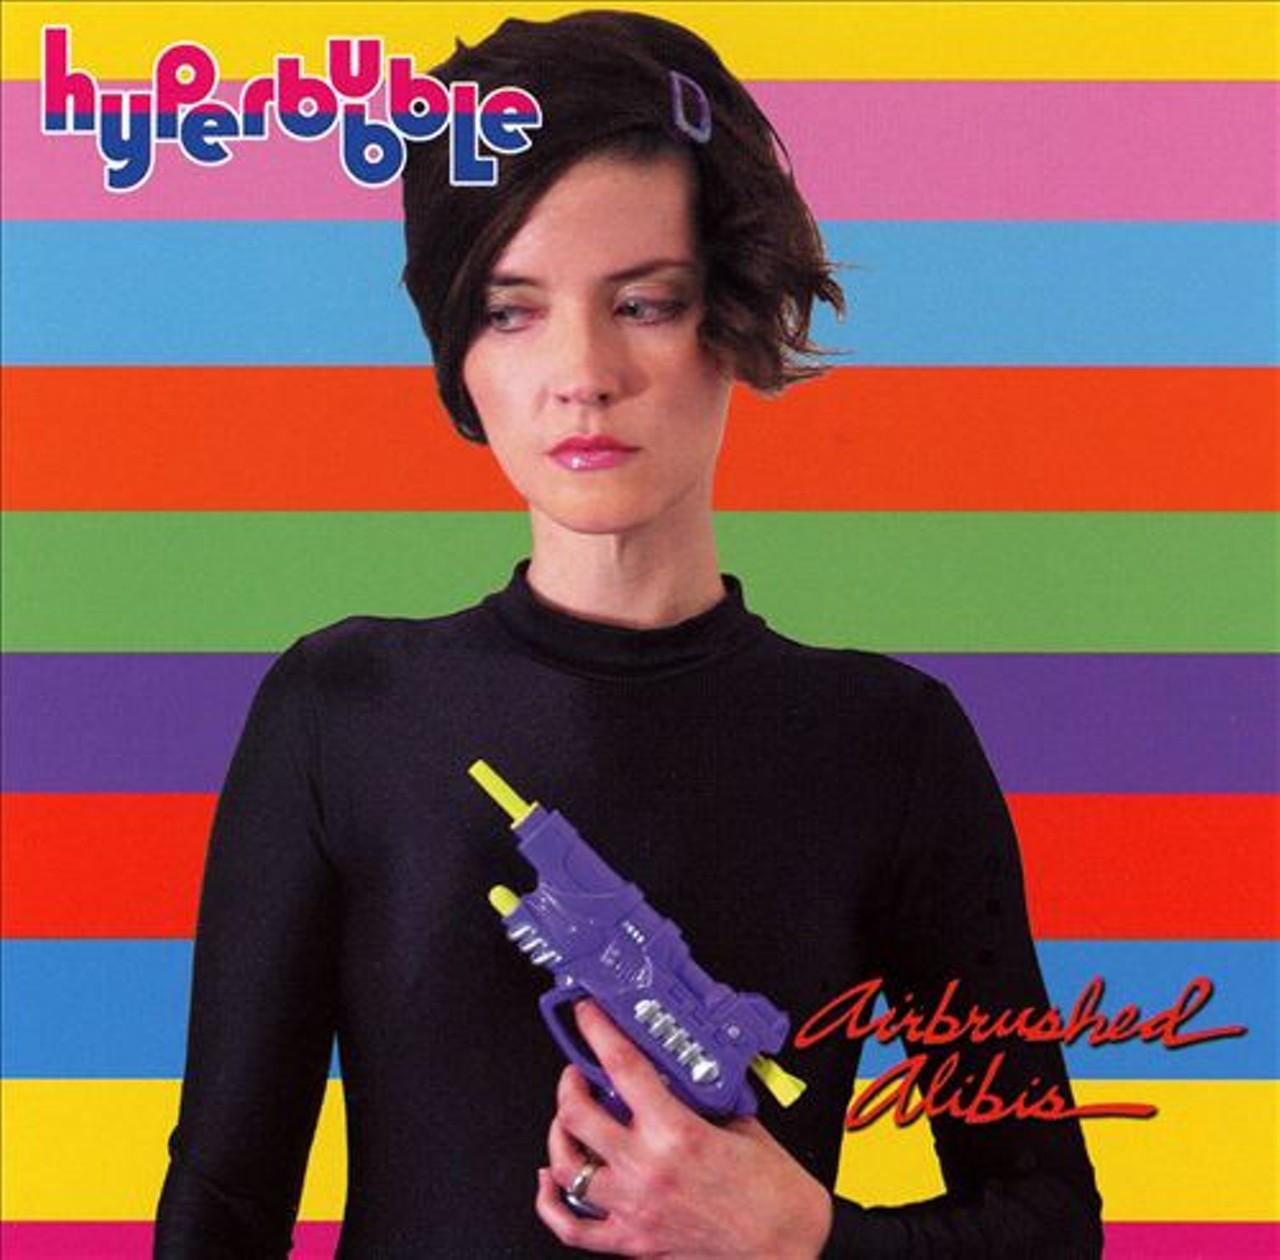 Hyperbubble: "Airbrushed Alibis"
San Antonio husband-wife duo Jeff and Jessica DeCuir cranked out a number of delightfully subversive synth-pop releases from the 2000s to the present, including this catchy and colorful 2007 album that may be their best.
Photo via Filthy Little Angels